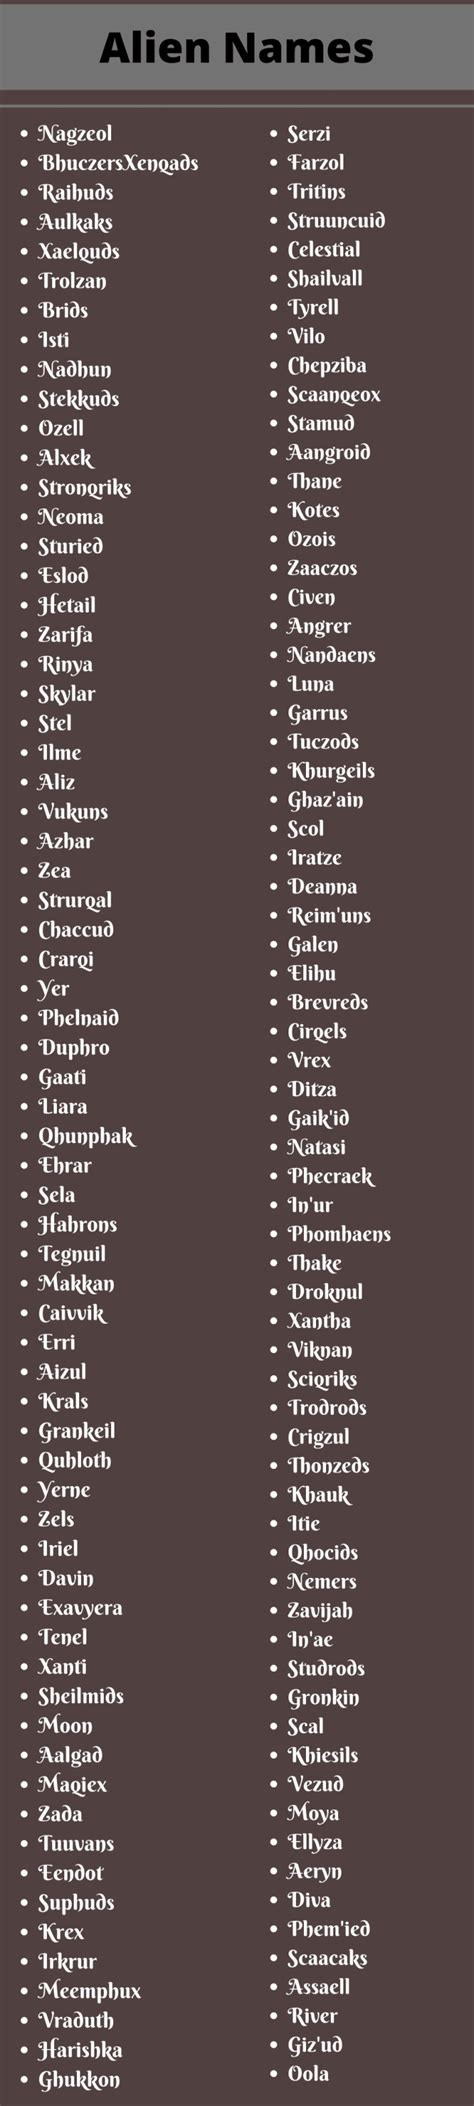 Alien Names 400 Cool Alien Names Ideas And Suggestions